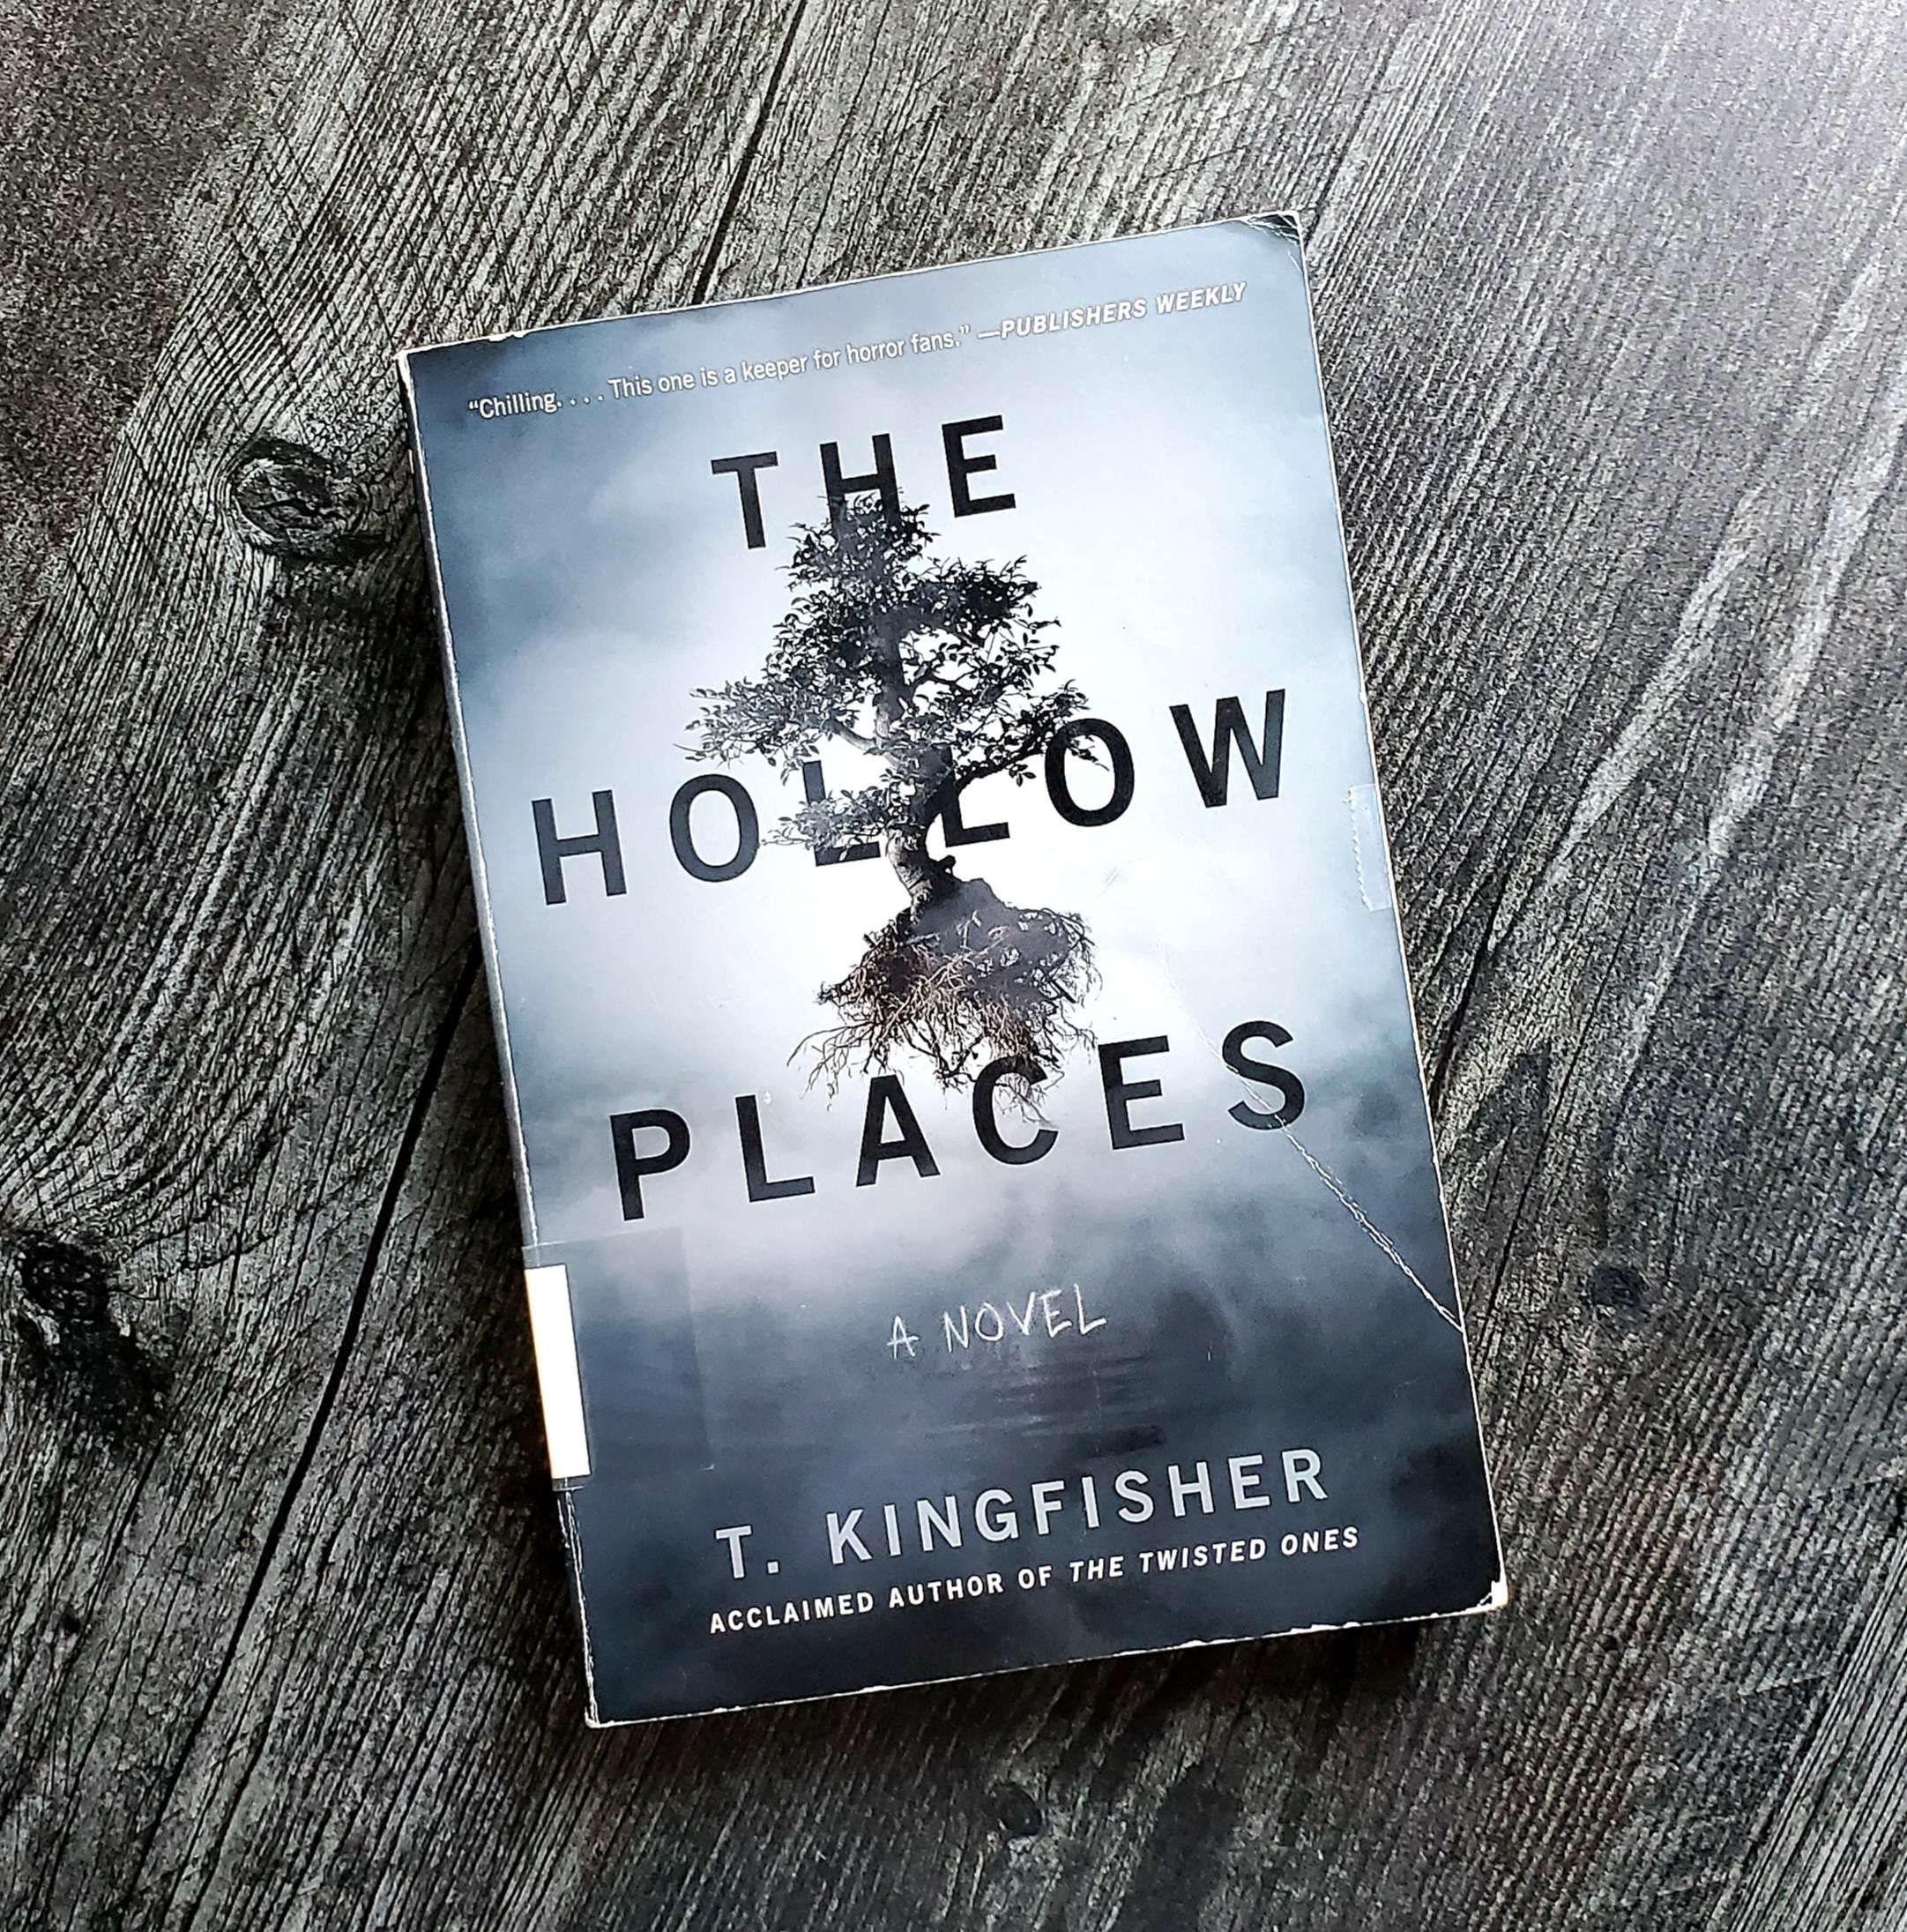 book cover of THE HOLLOW PLACES